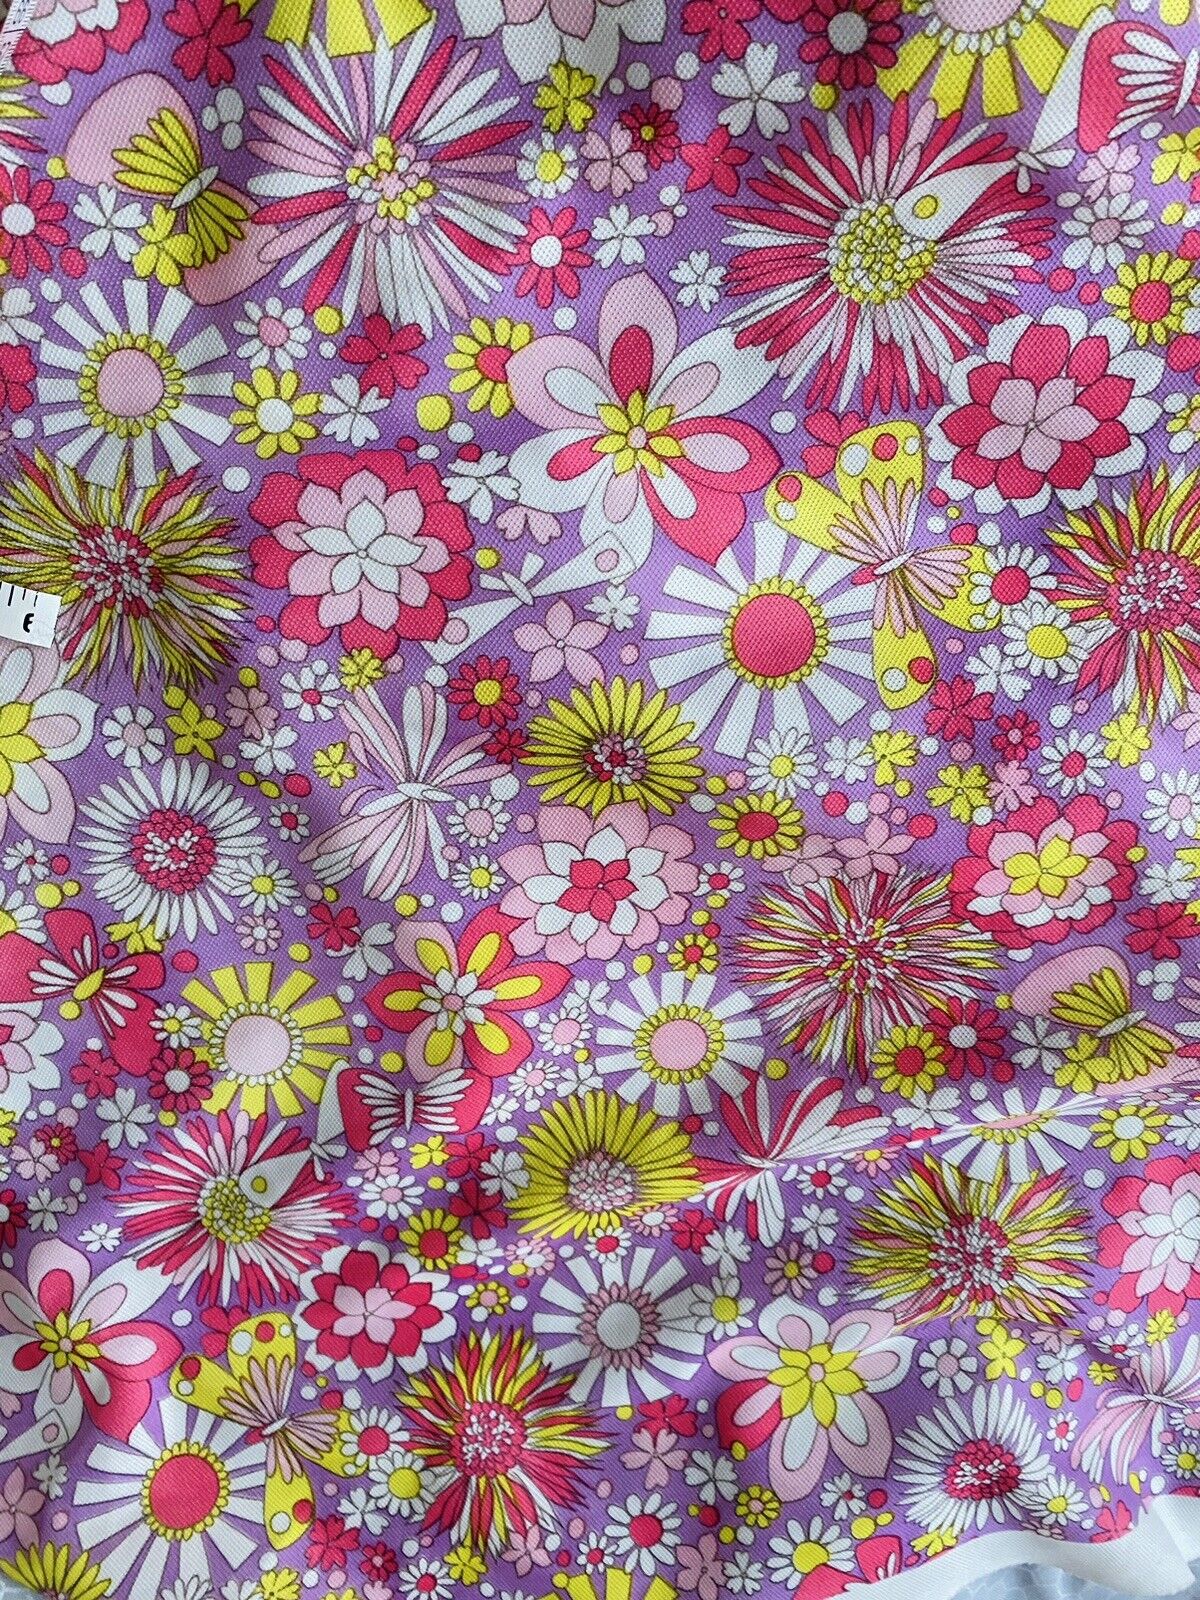 Flower Power Groovy Mod Fabric Vintage Floral Material Polyester Scrap Remnant